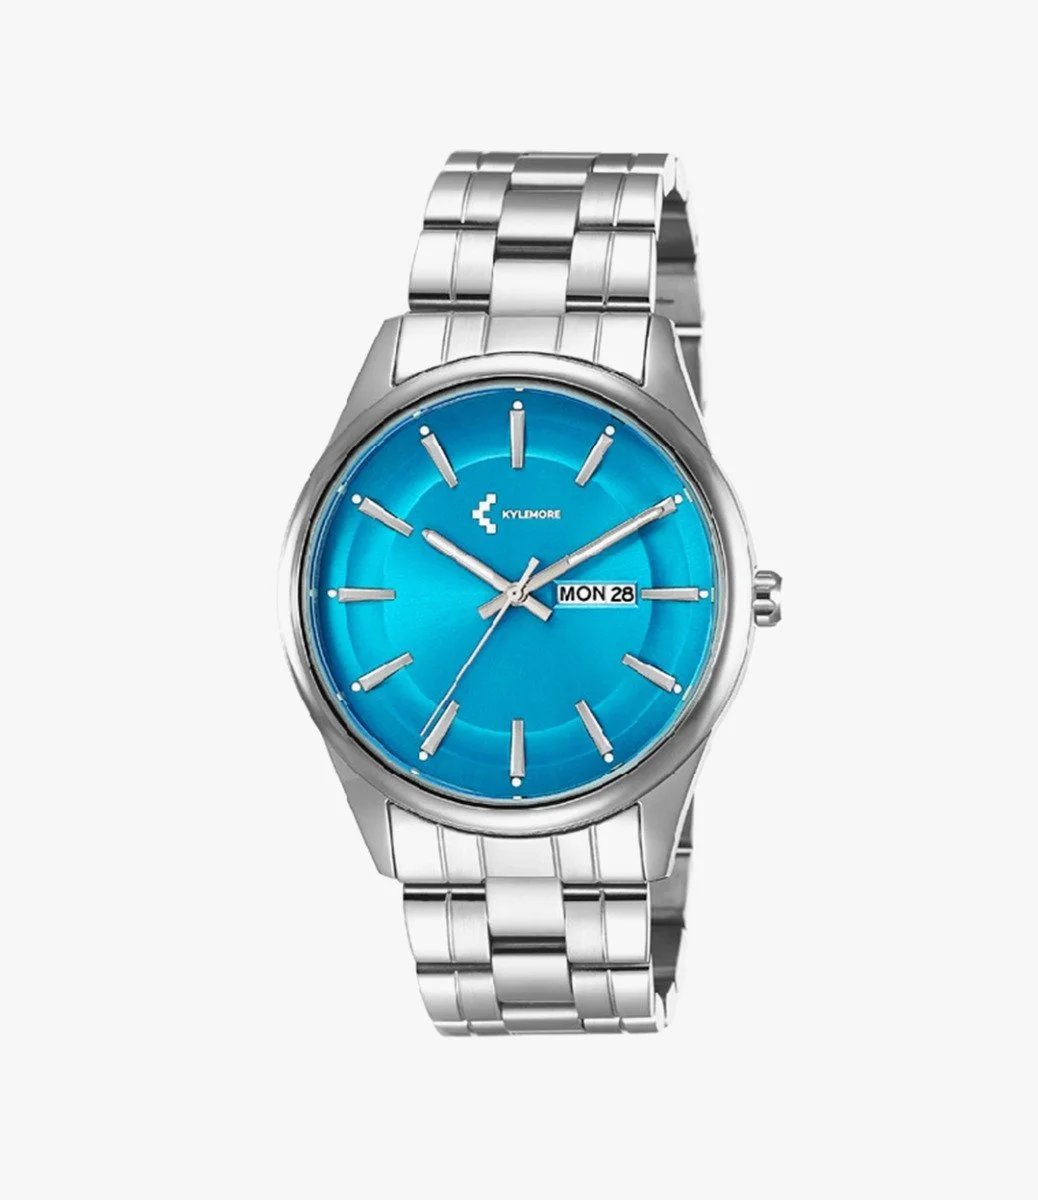 The Stainless Steel Light Blue Kylemore Watch